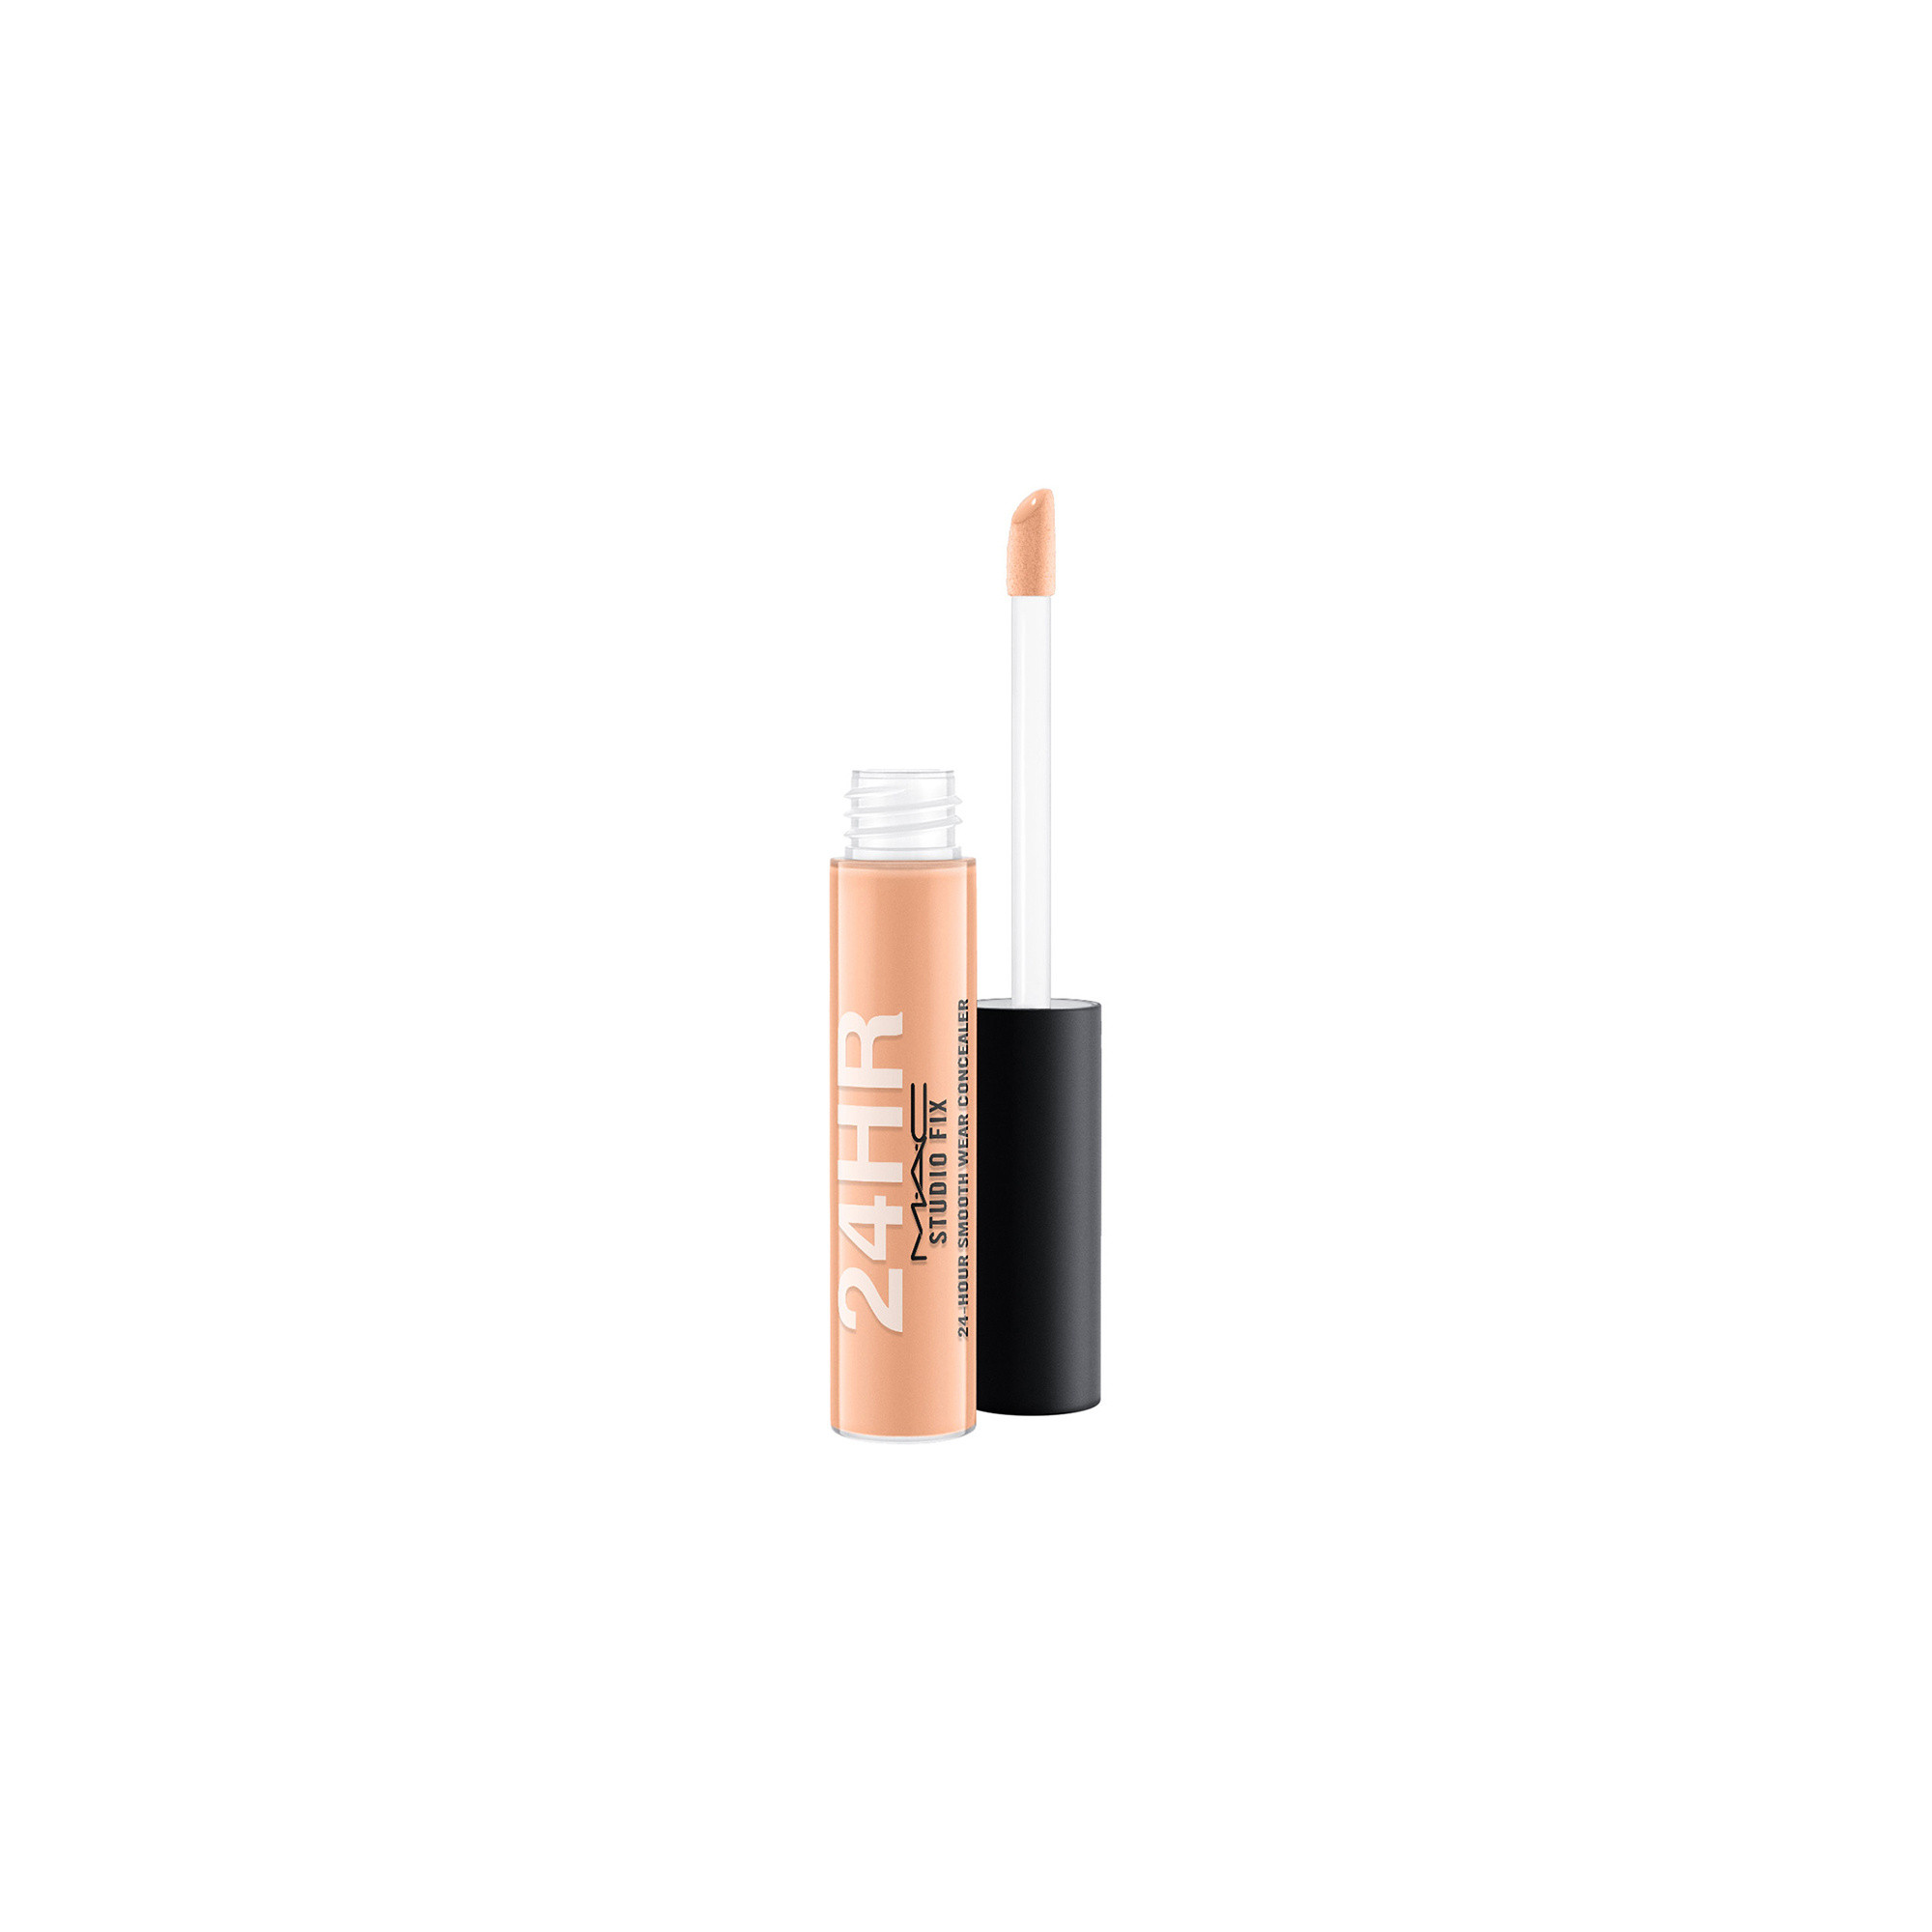 Studio Fix 24H Concealer - NW34, NW34, large image number 1